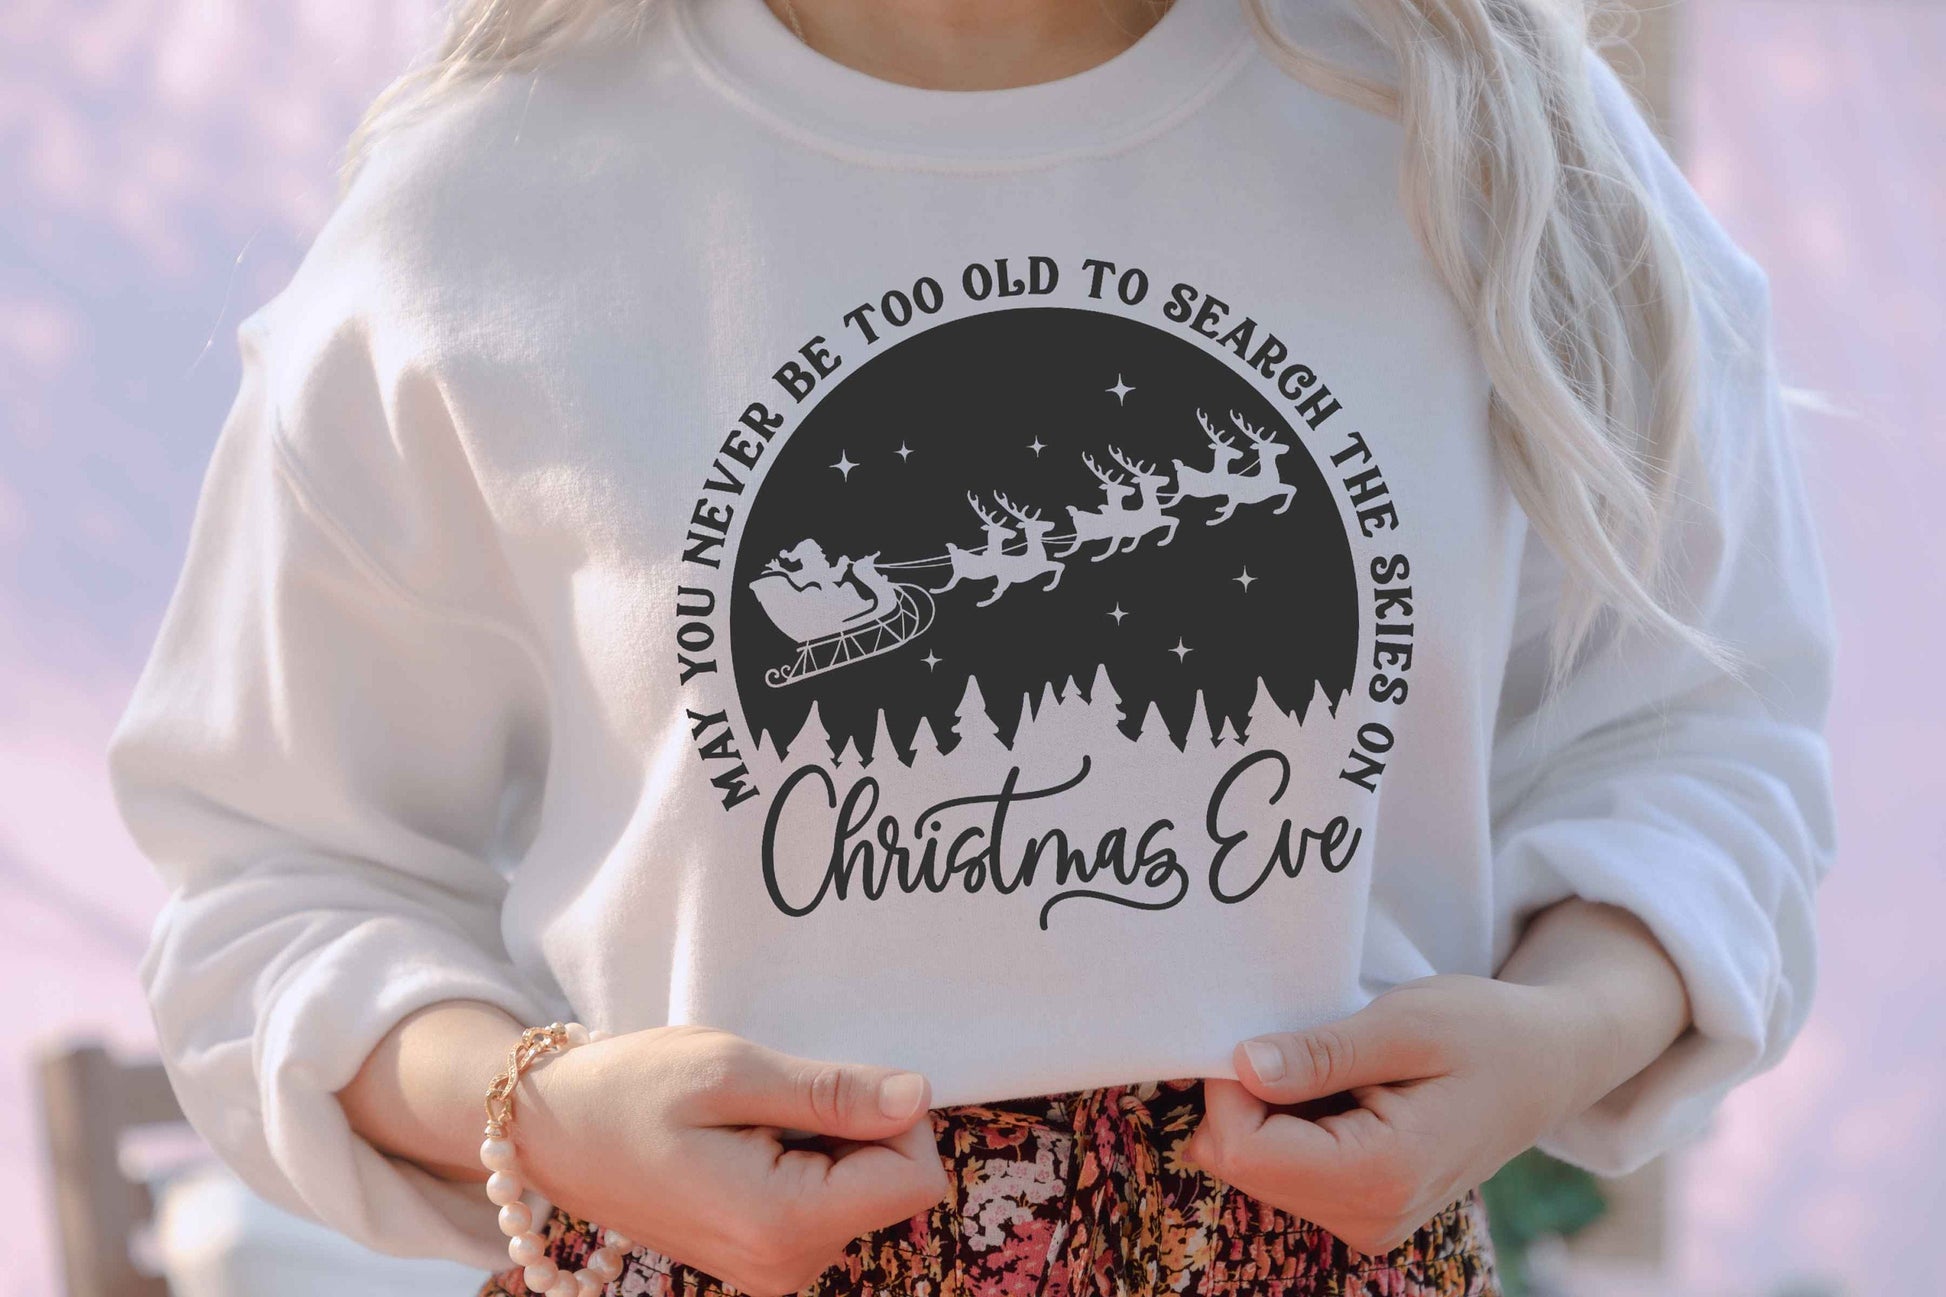 May You Never Be Too Old to Search the Skies on Christmas Eve Unisex Crewneck Fleece Pullover Sweatshirt